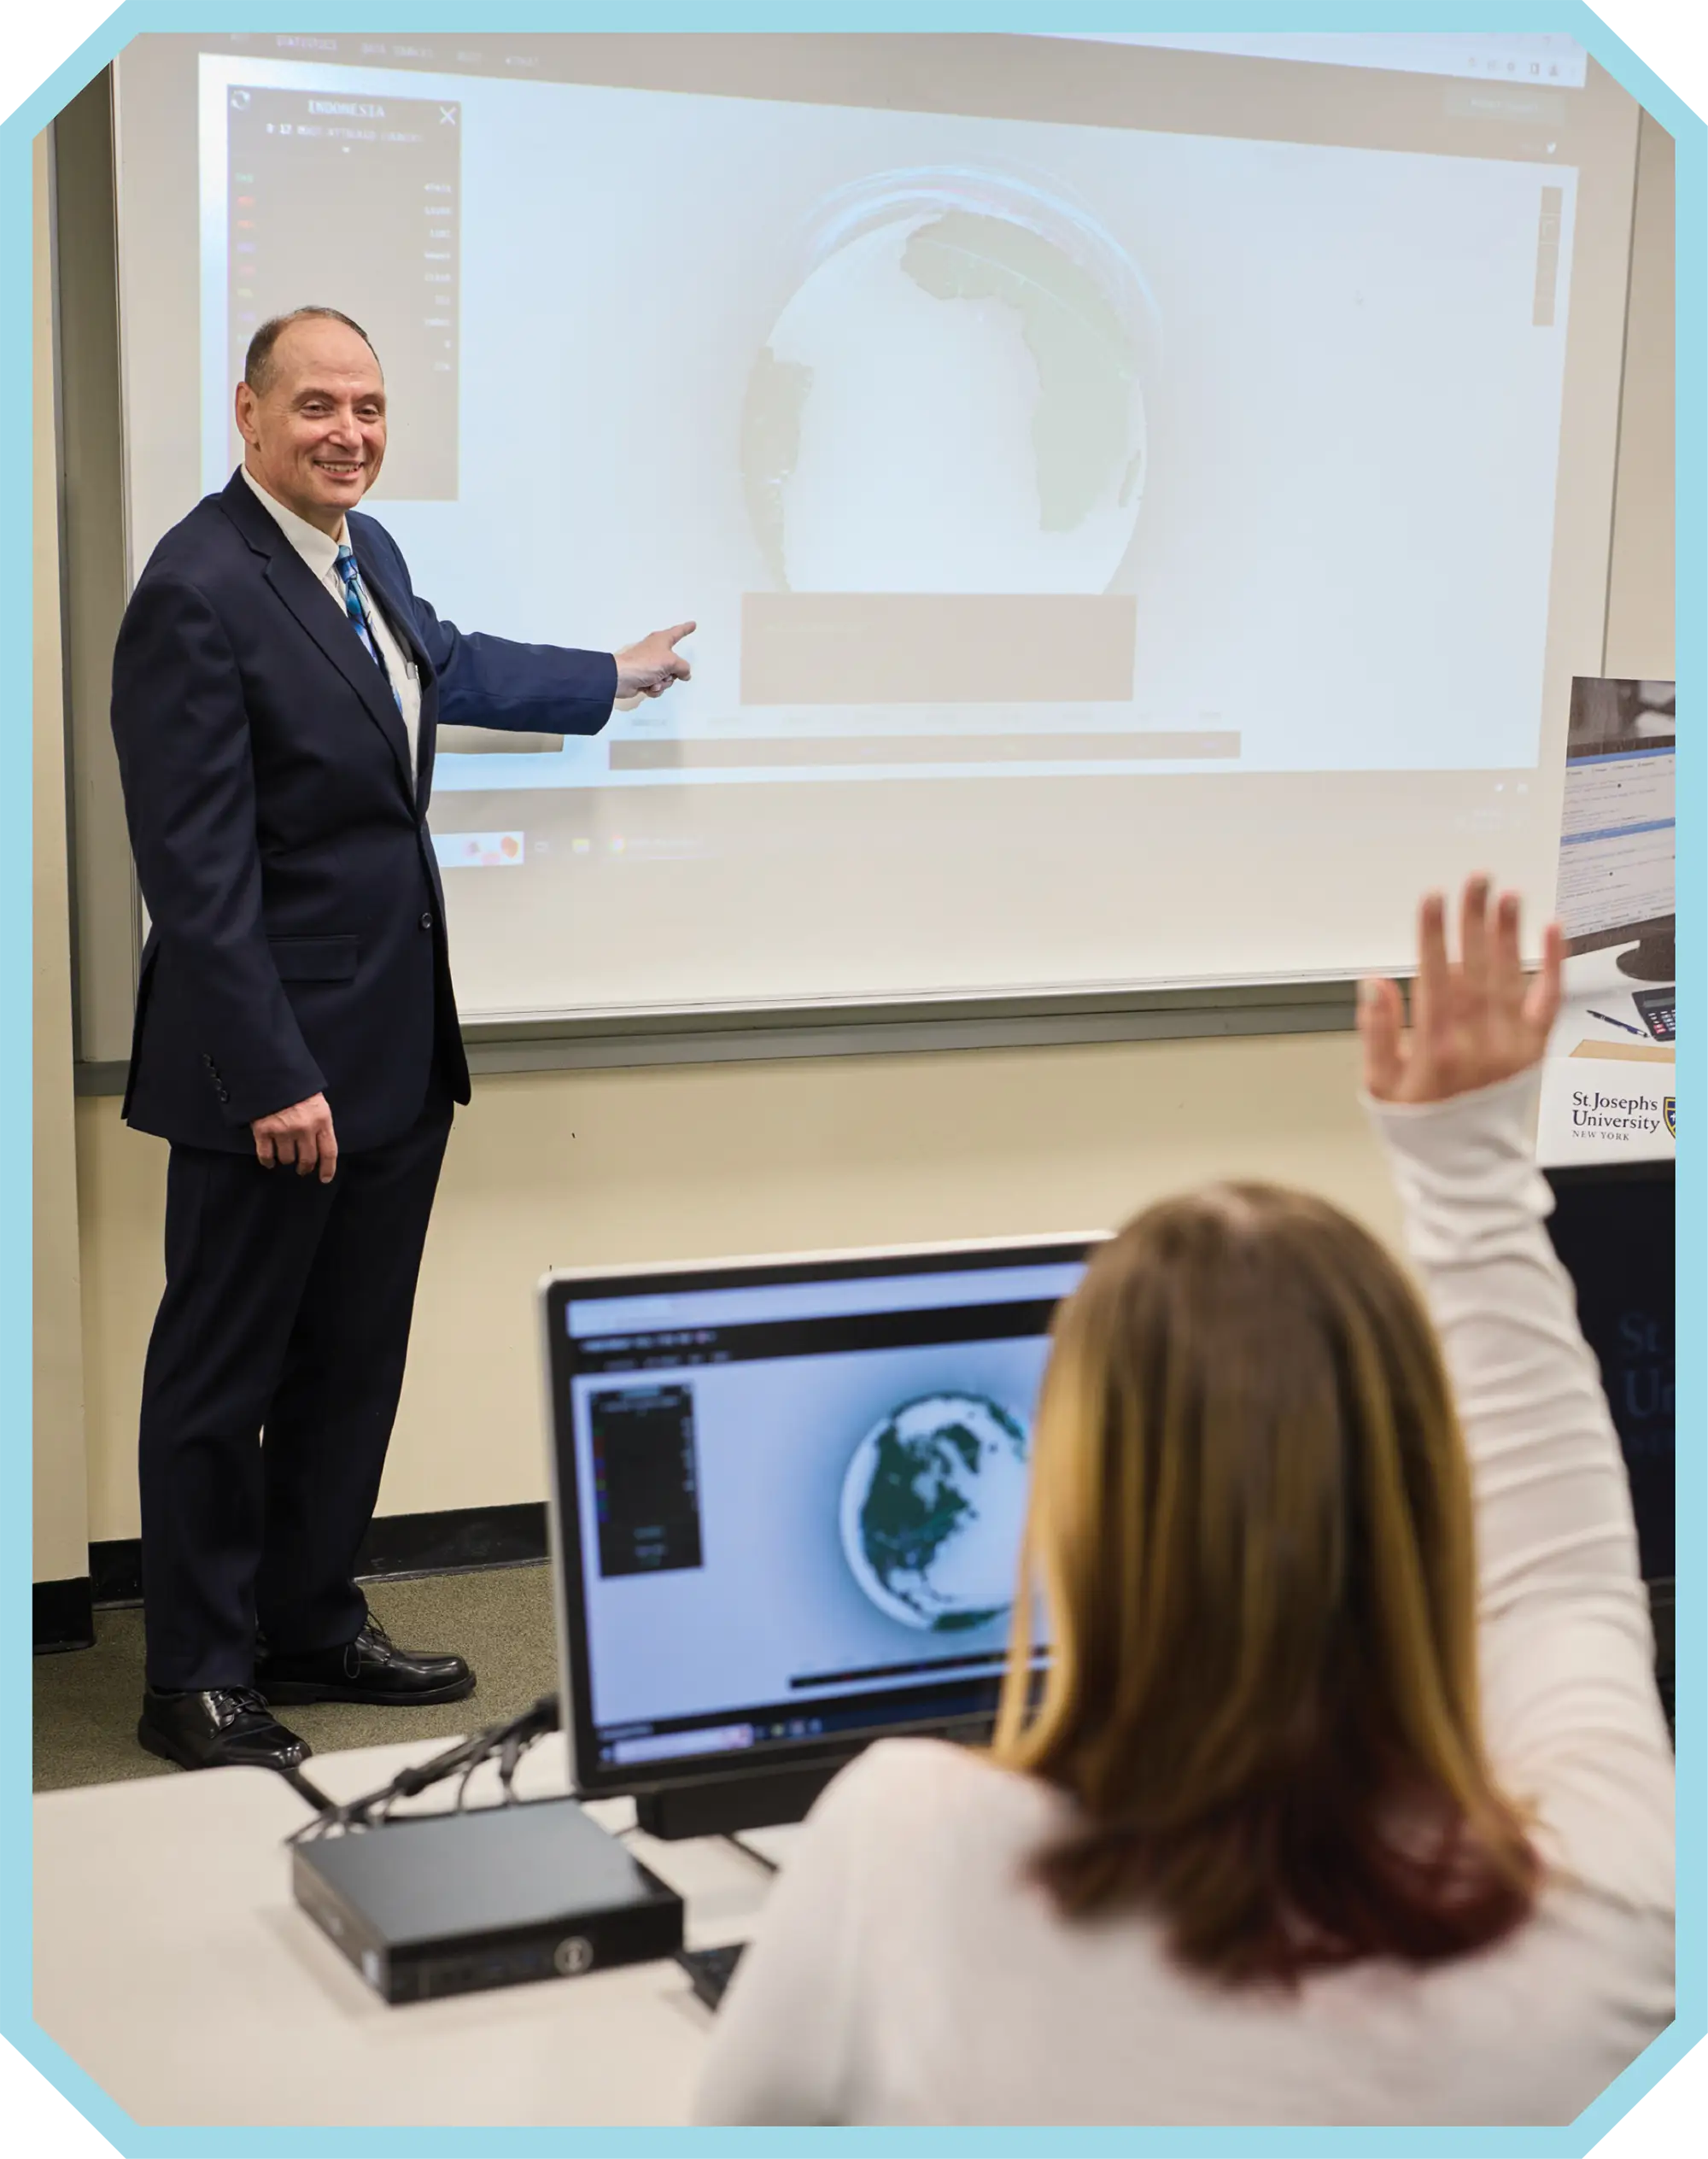 man in suit teaching a class at the projector screen while a student raises their hand